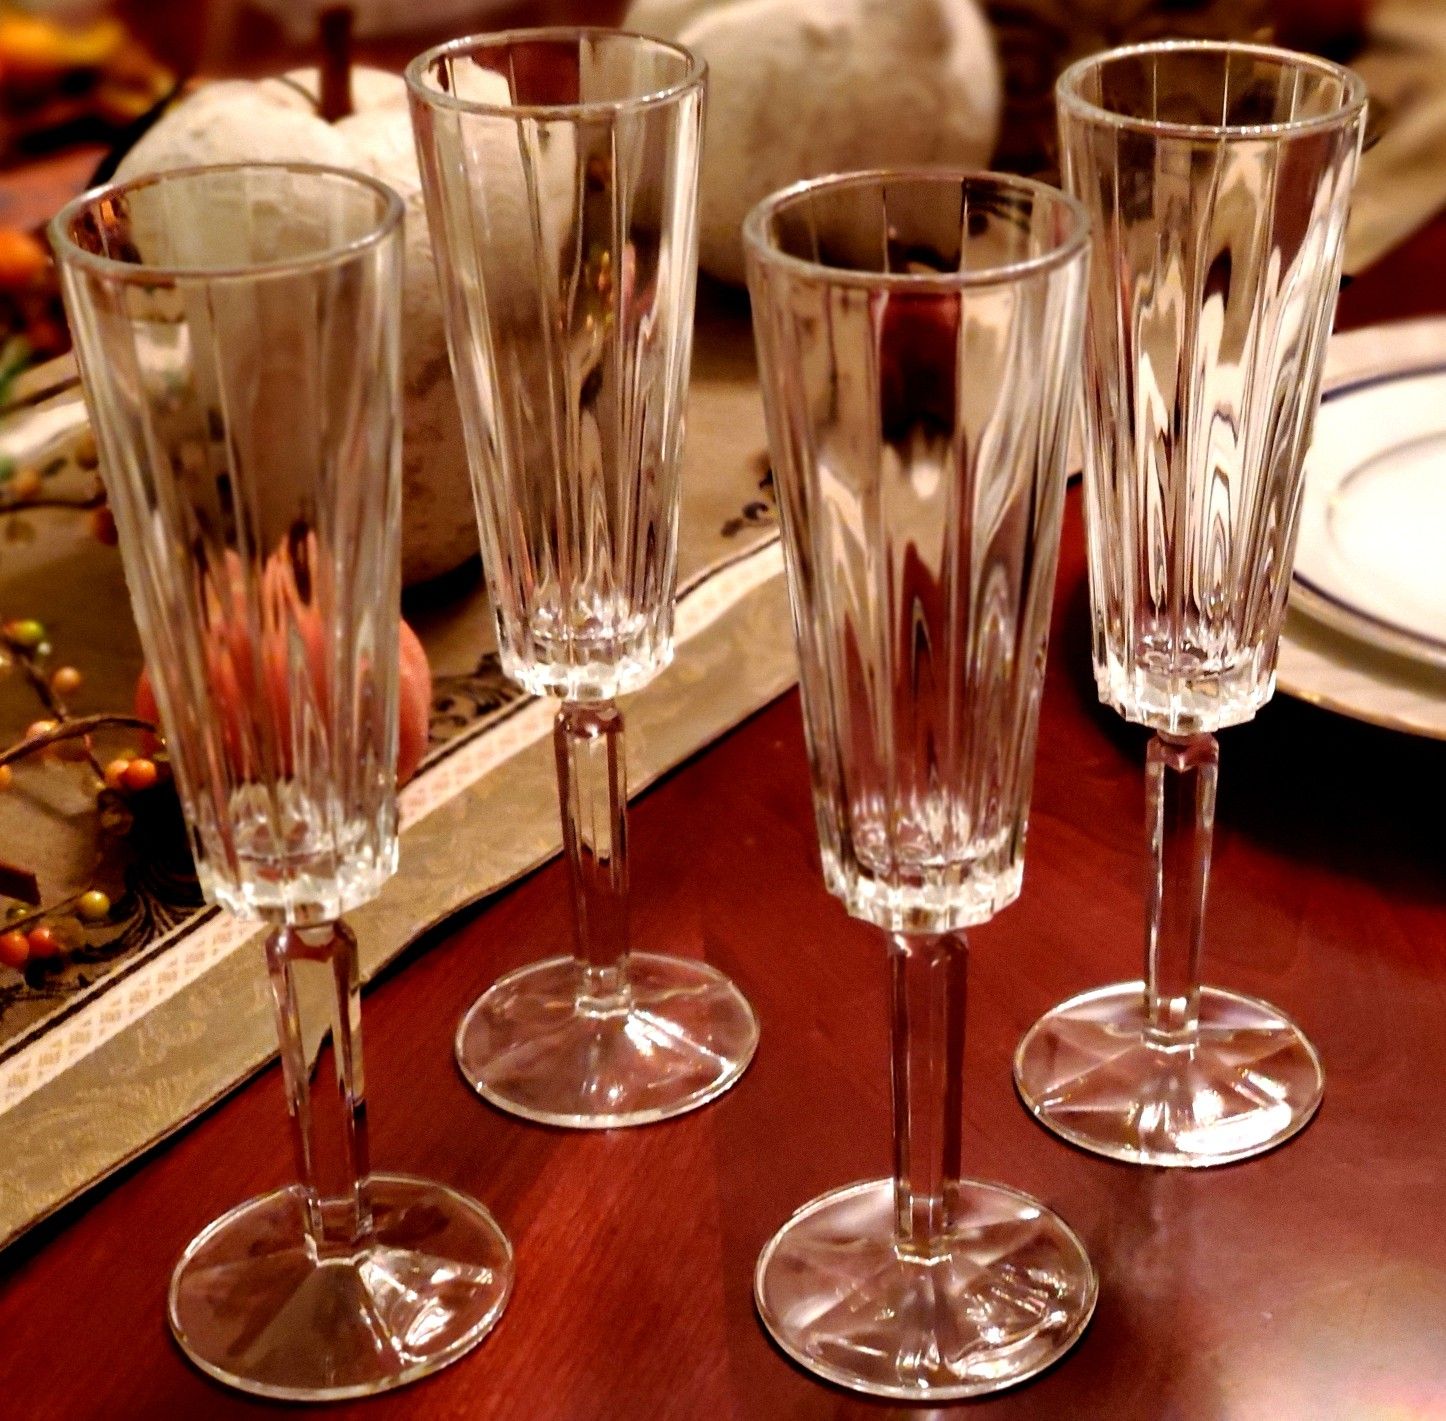 2 Pairs of Brand New Toasting Champagne Flutes Perfect for wedding or holiday gift (4 glasses included)